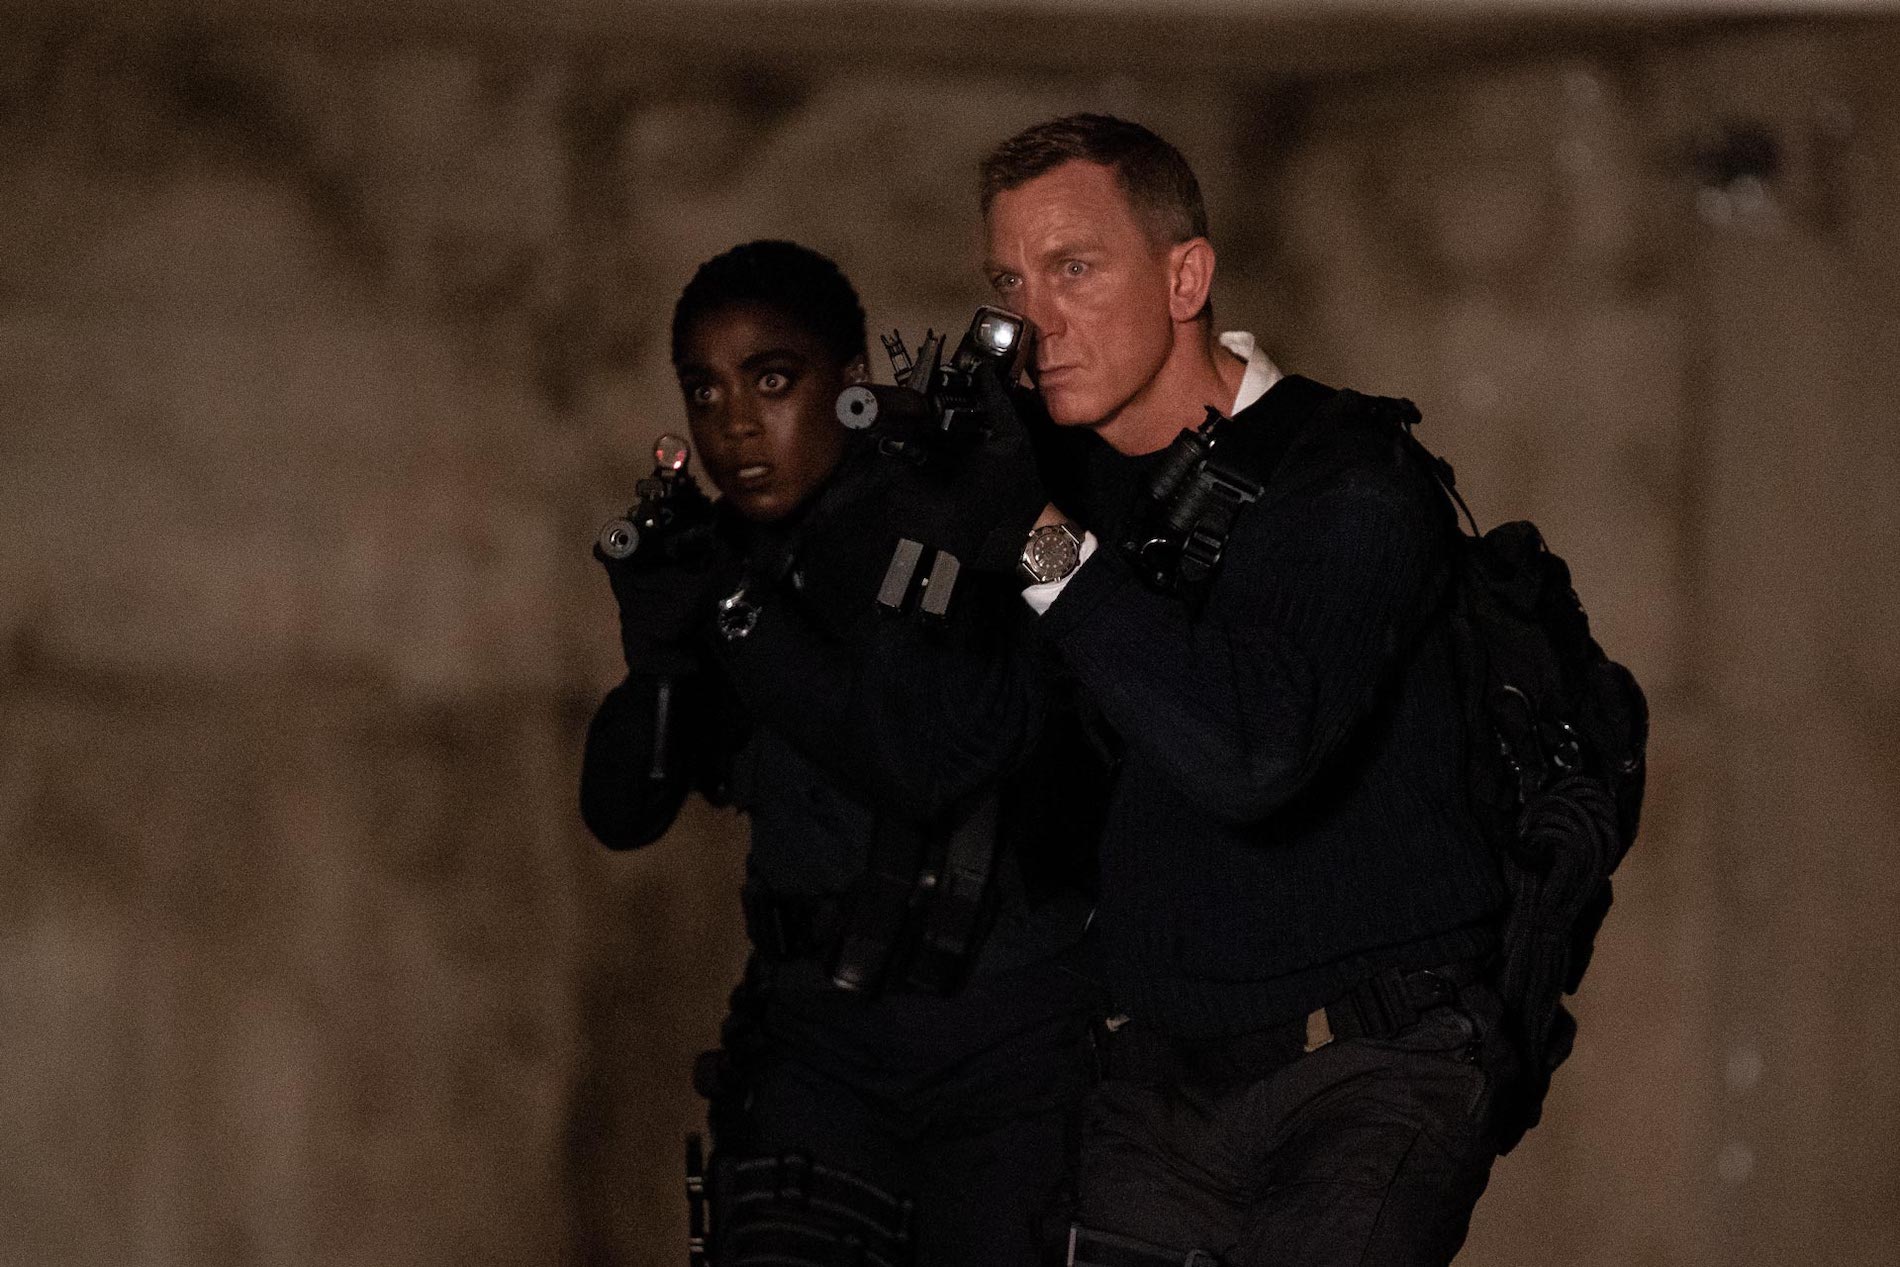 Excited About the New James Bond Movie? Here Are 5 Spy + Action Roles Hiring Now